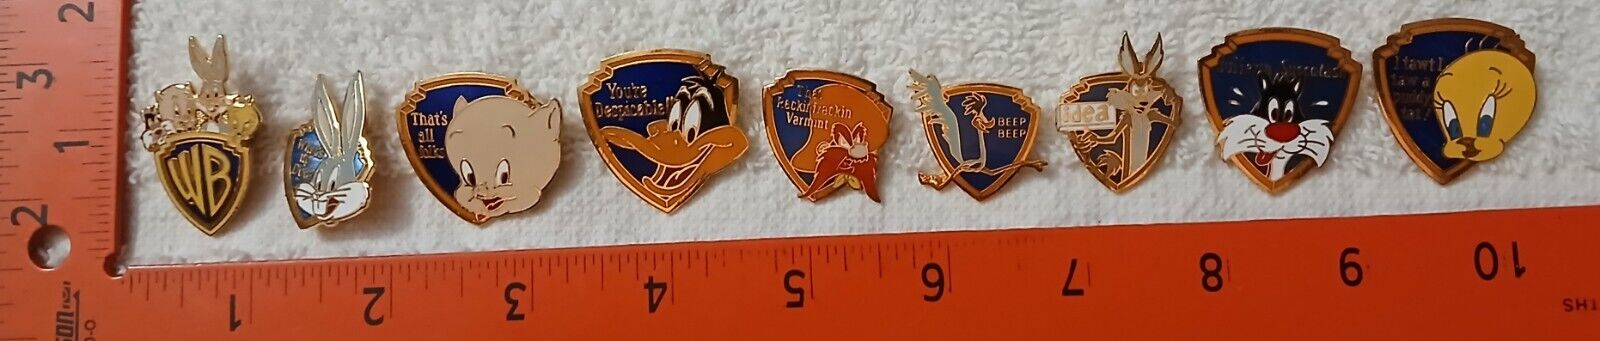 Warner Brothers Looney Tunes Pin Lot Of 9. New-No Package